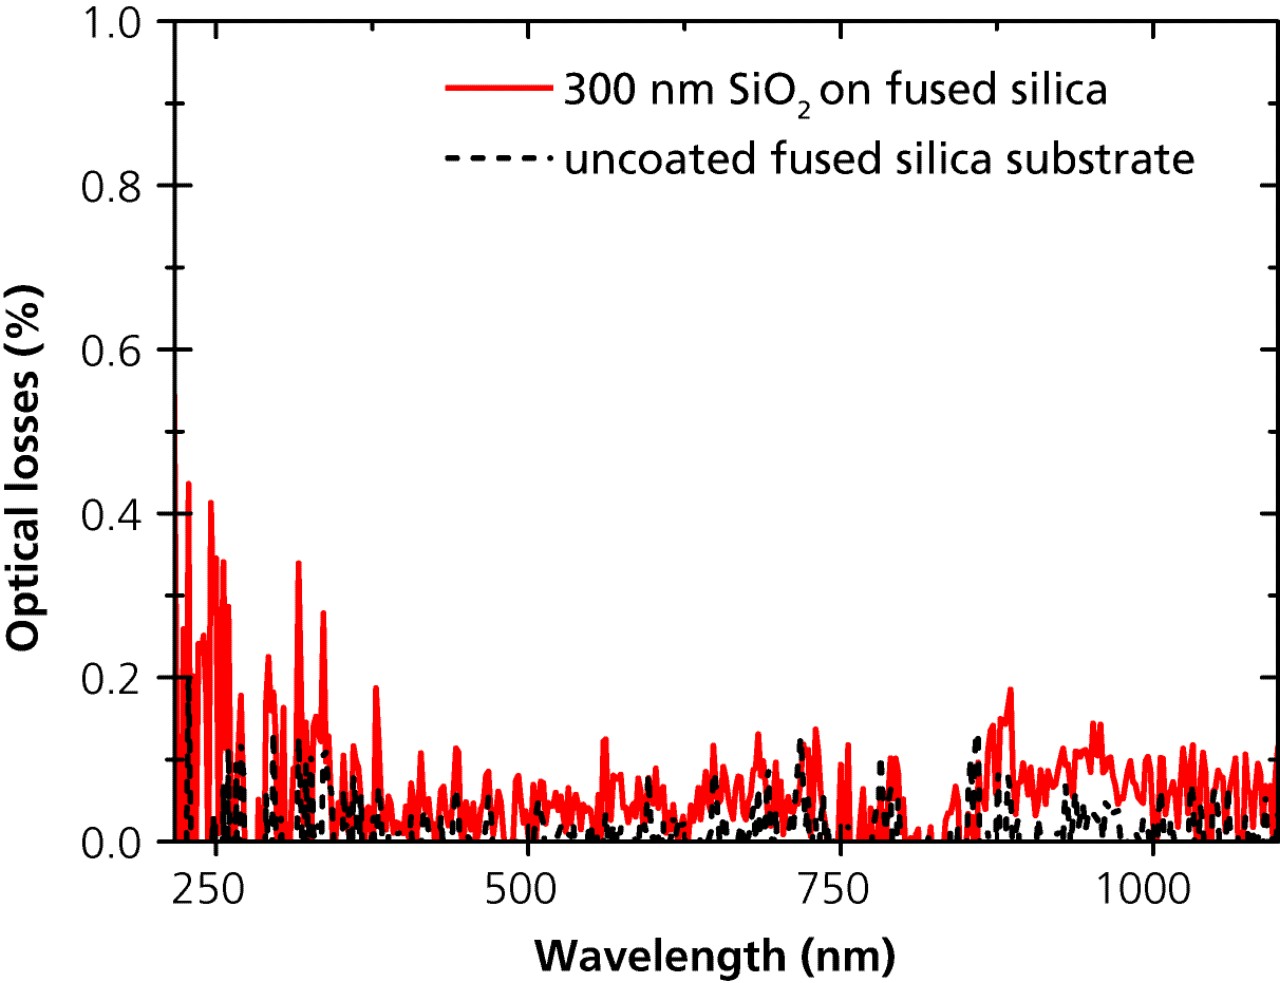 Chart with low-loss SiO2 coating on fused silica substrate.